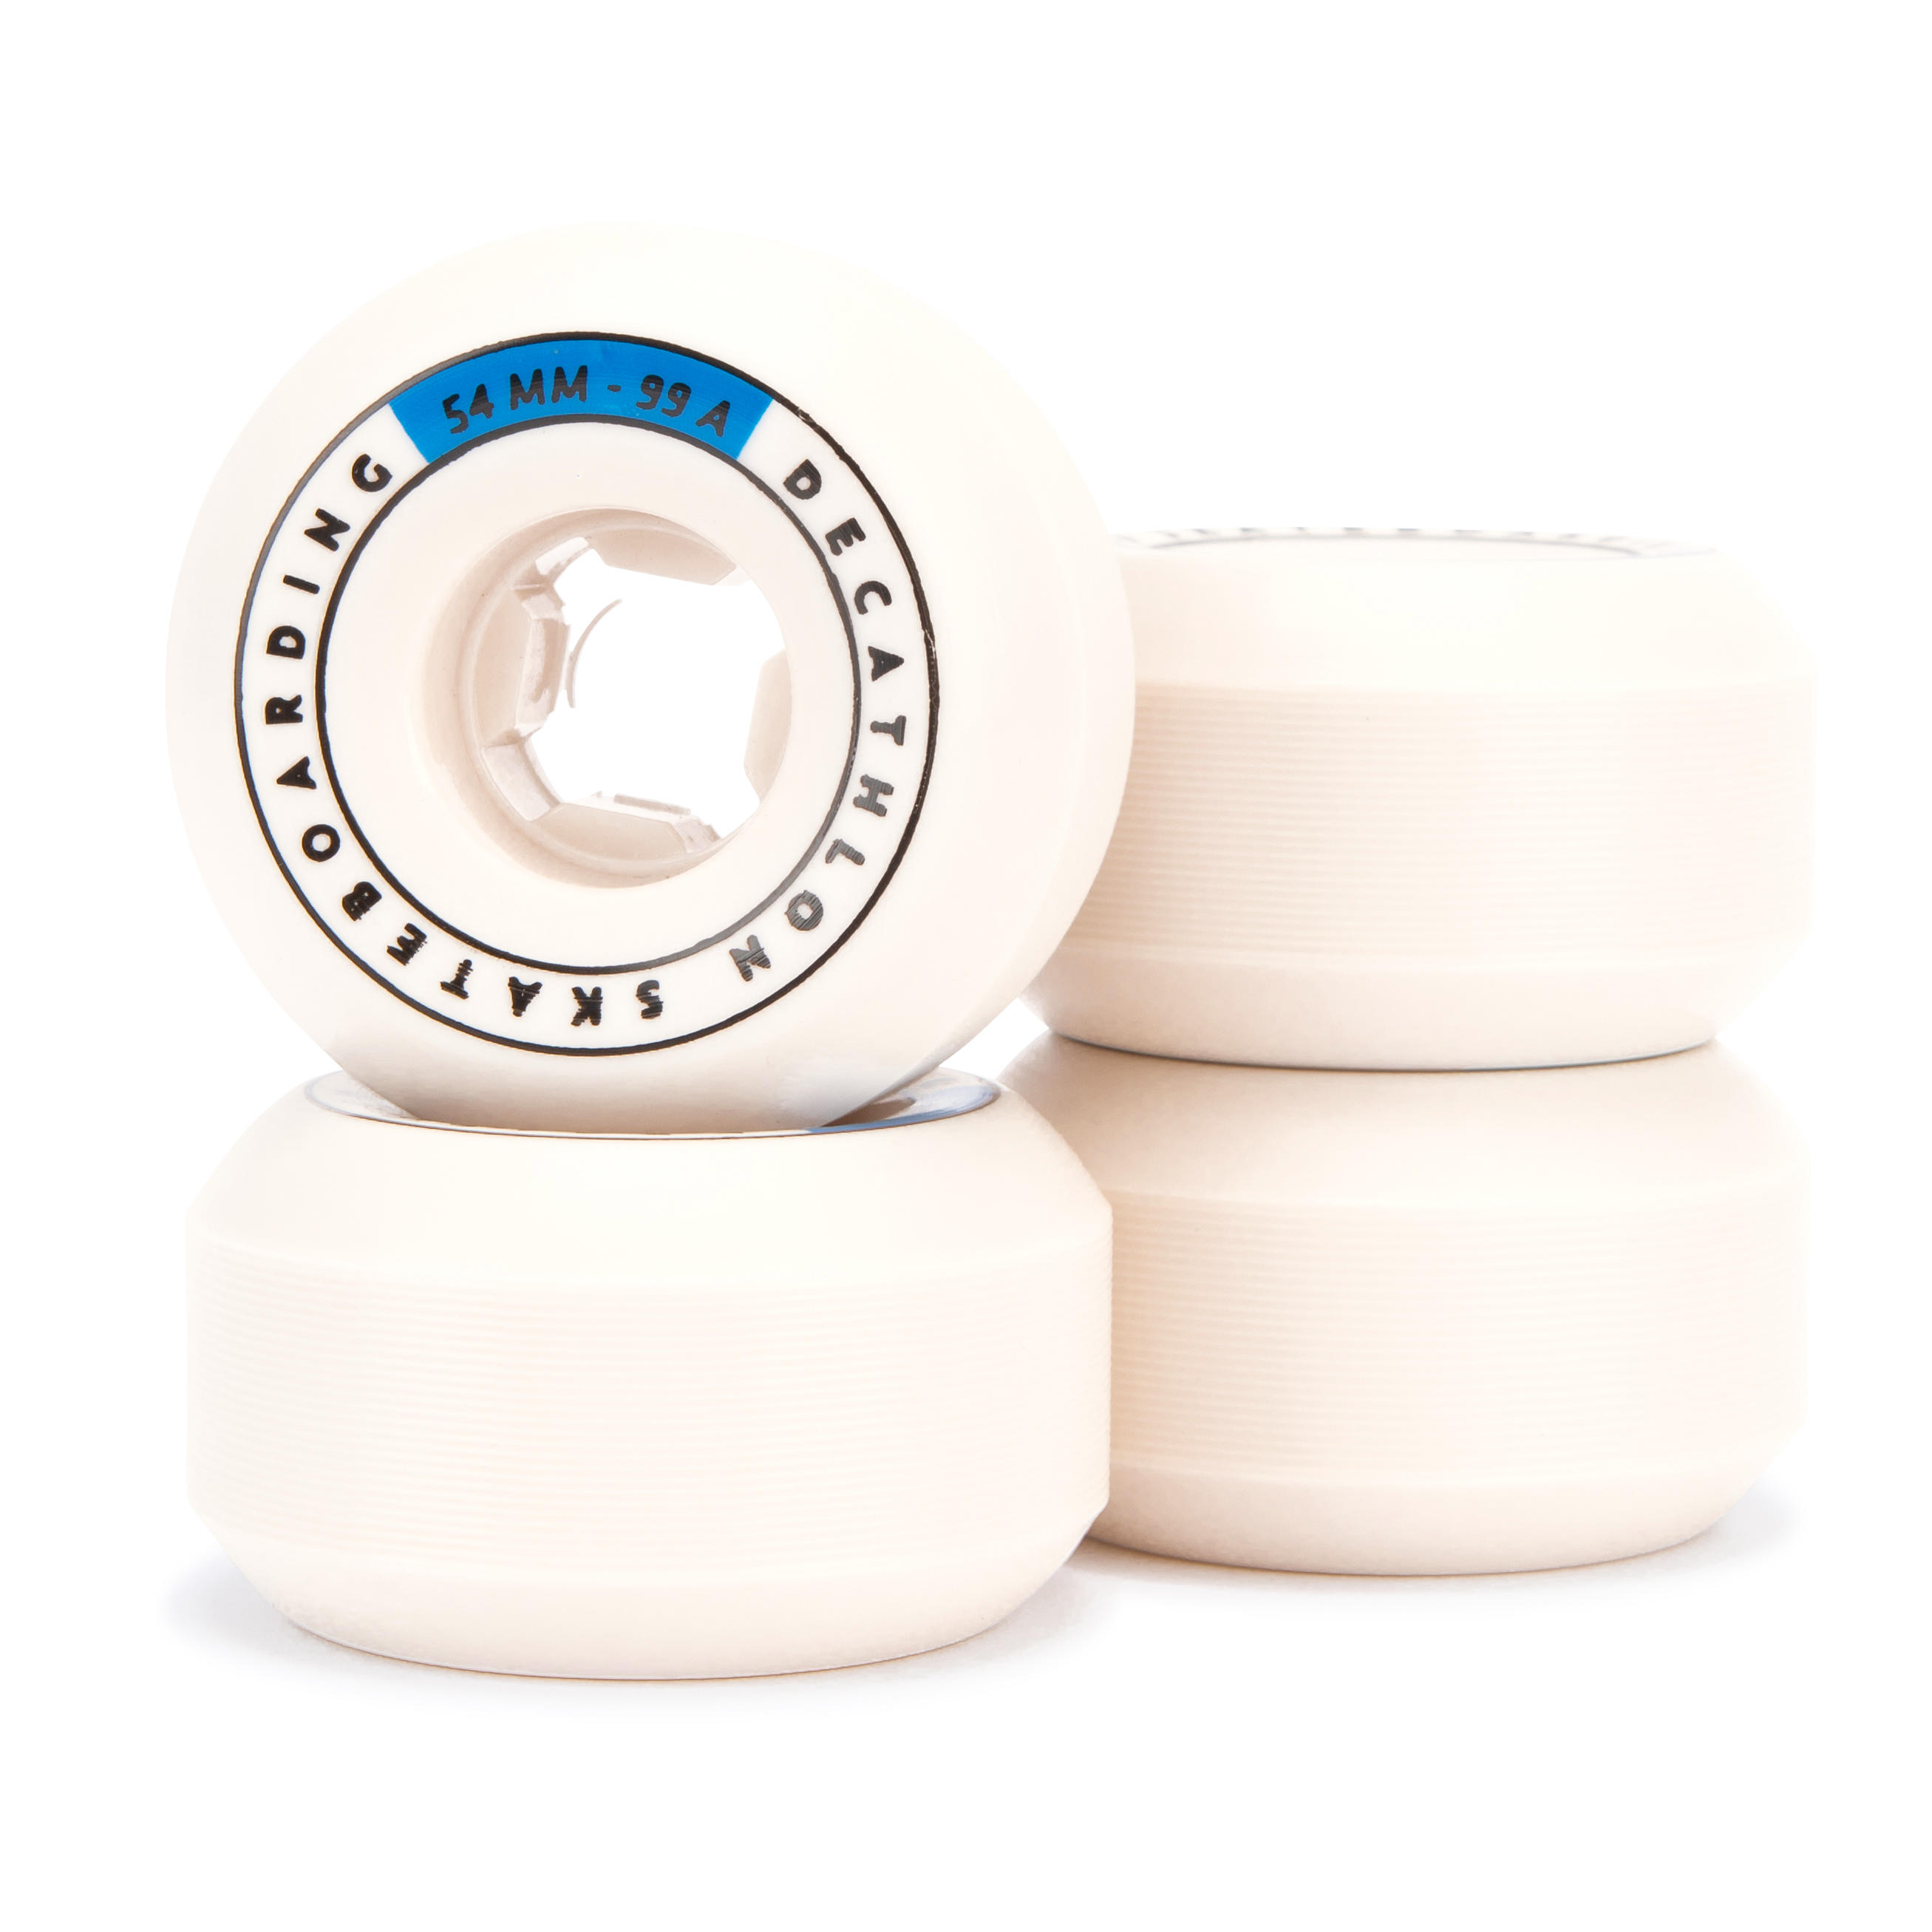 OXELO 54 mm 99A Conical Skateboard Wheels 4-Pack - Ivory